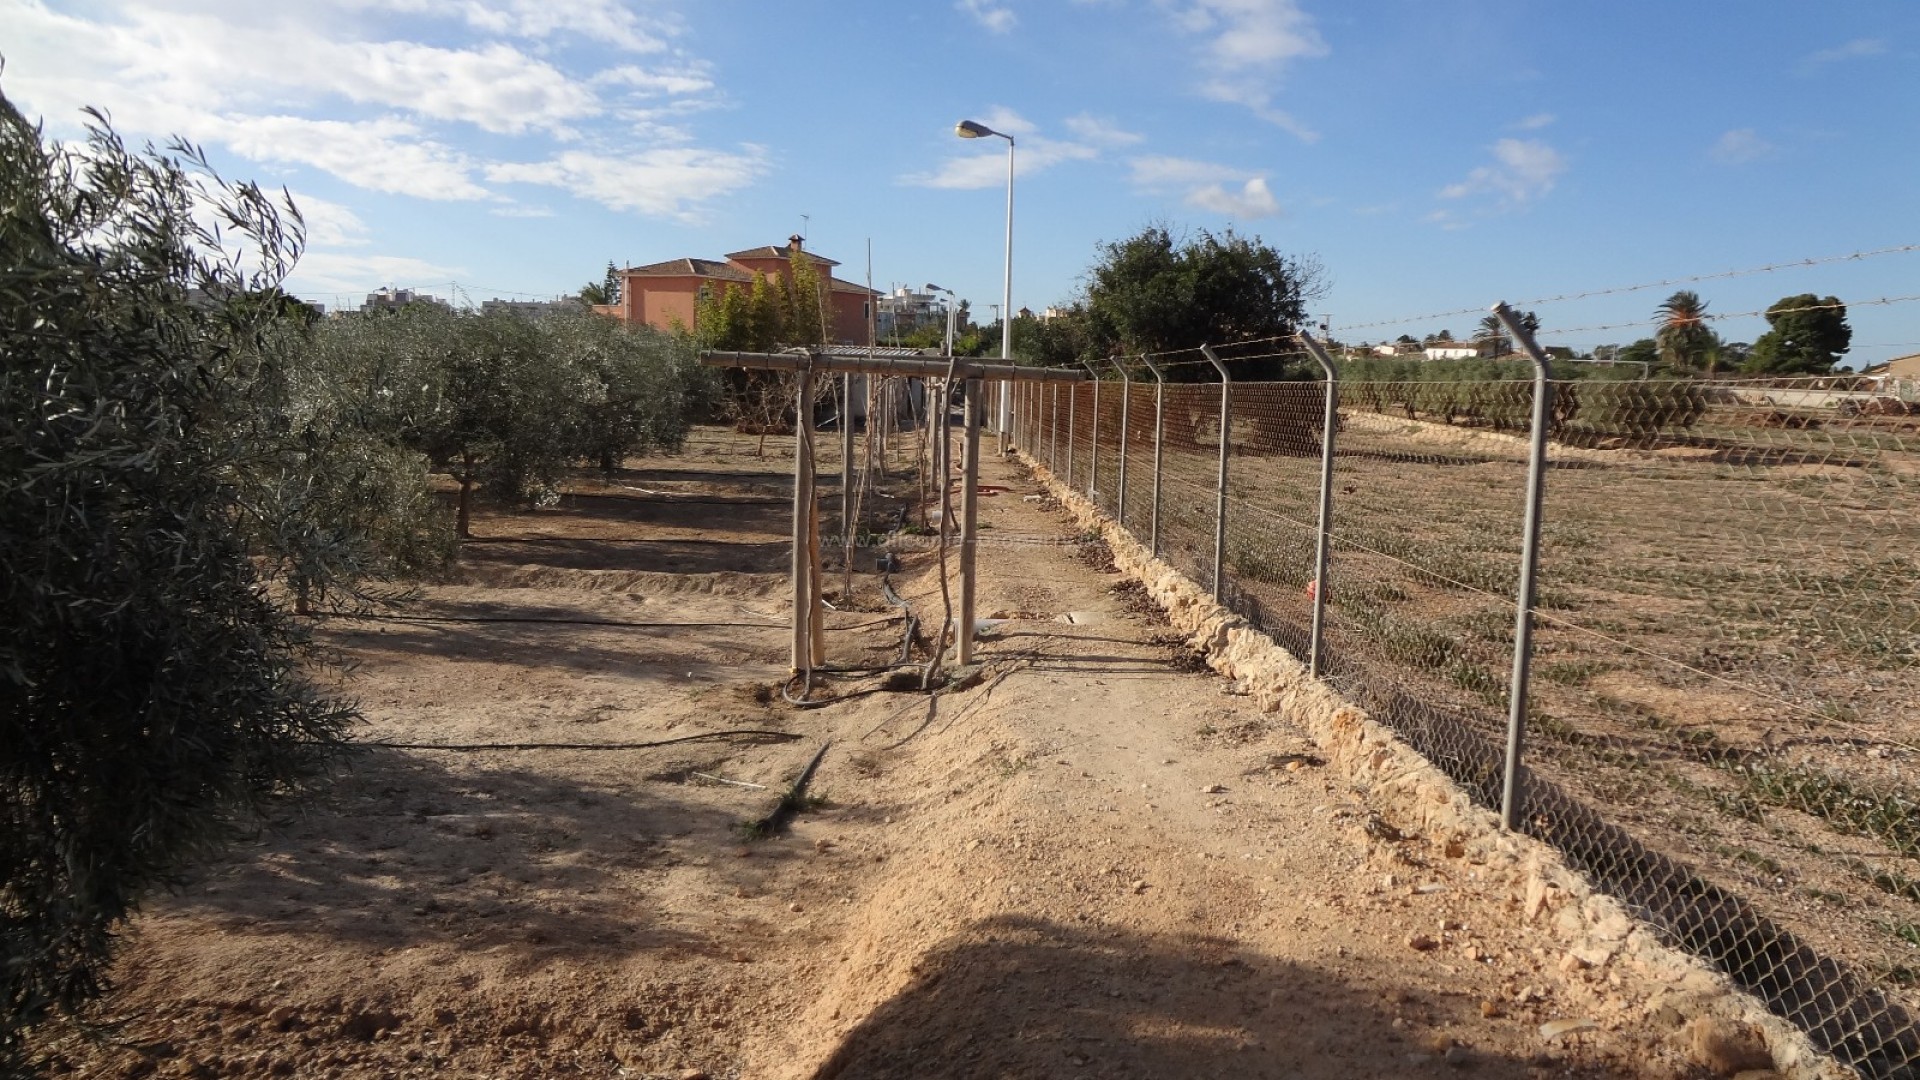 Country Property in El Altet